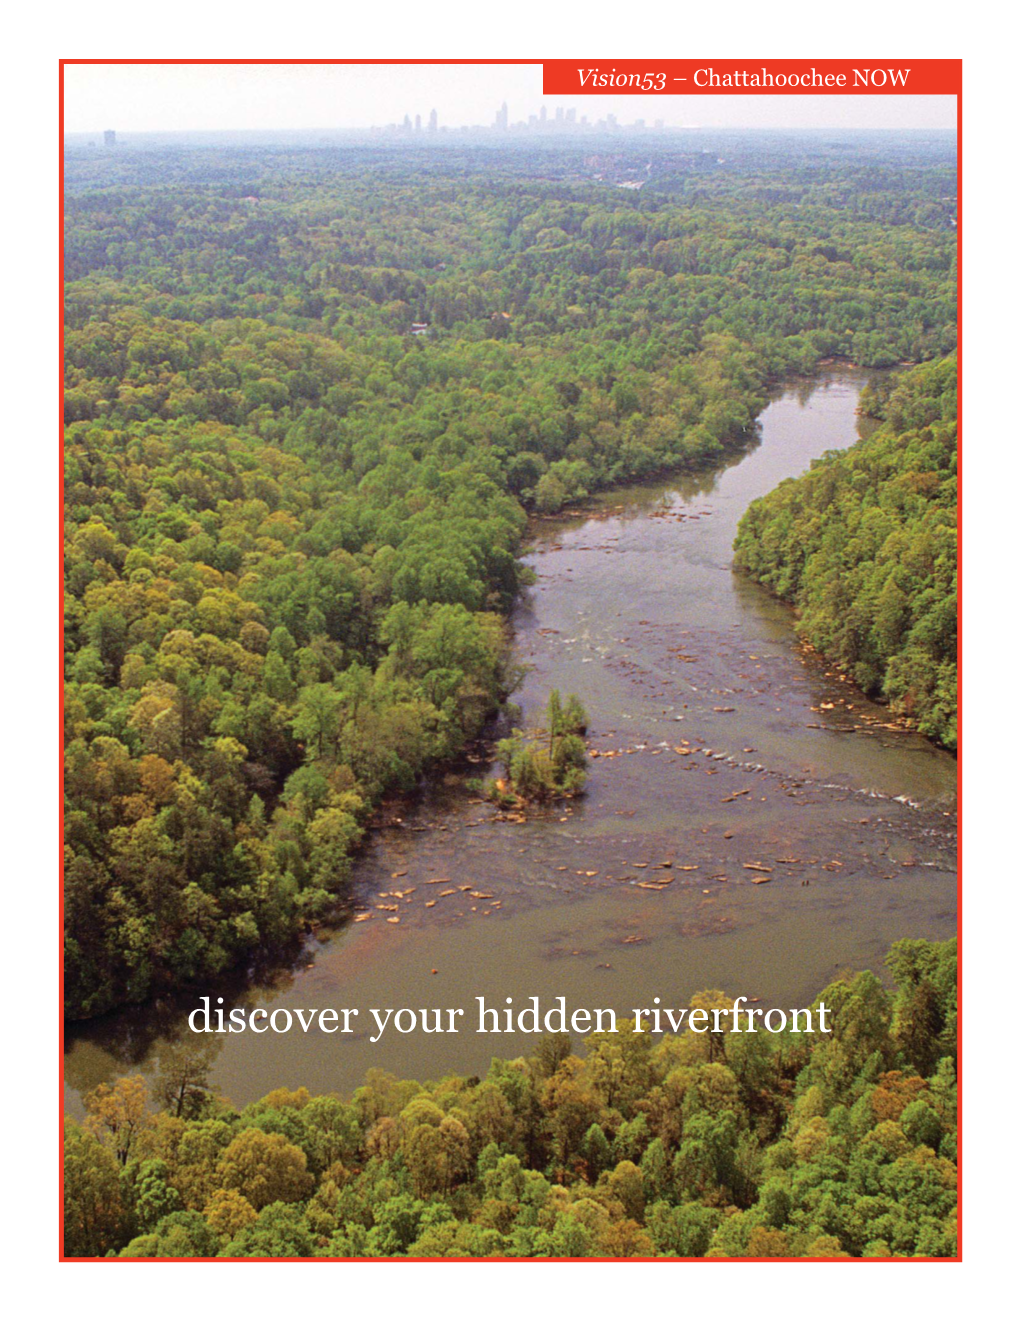 Discover Your Hidden Riverfront CHATTAHOOCHEE NOW